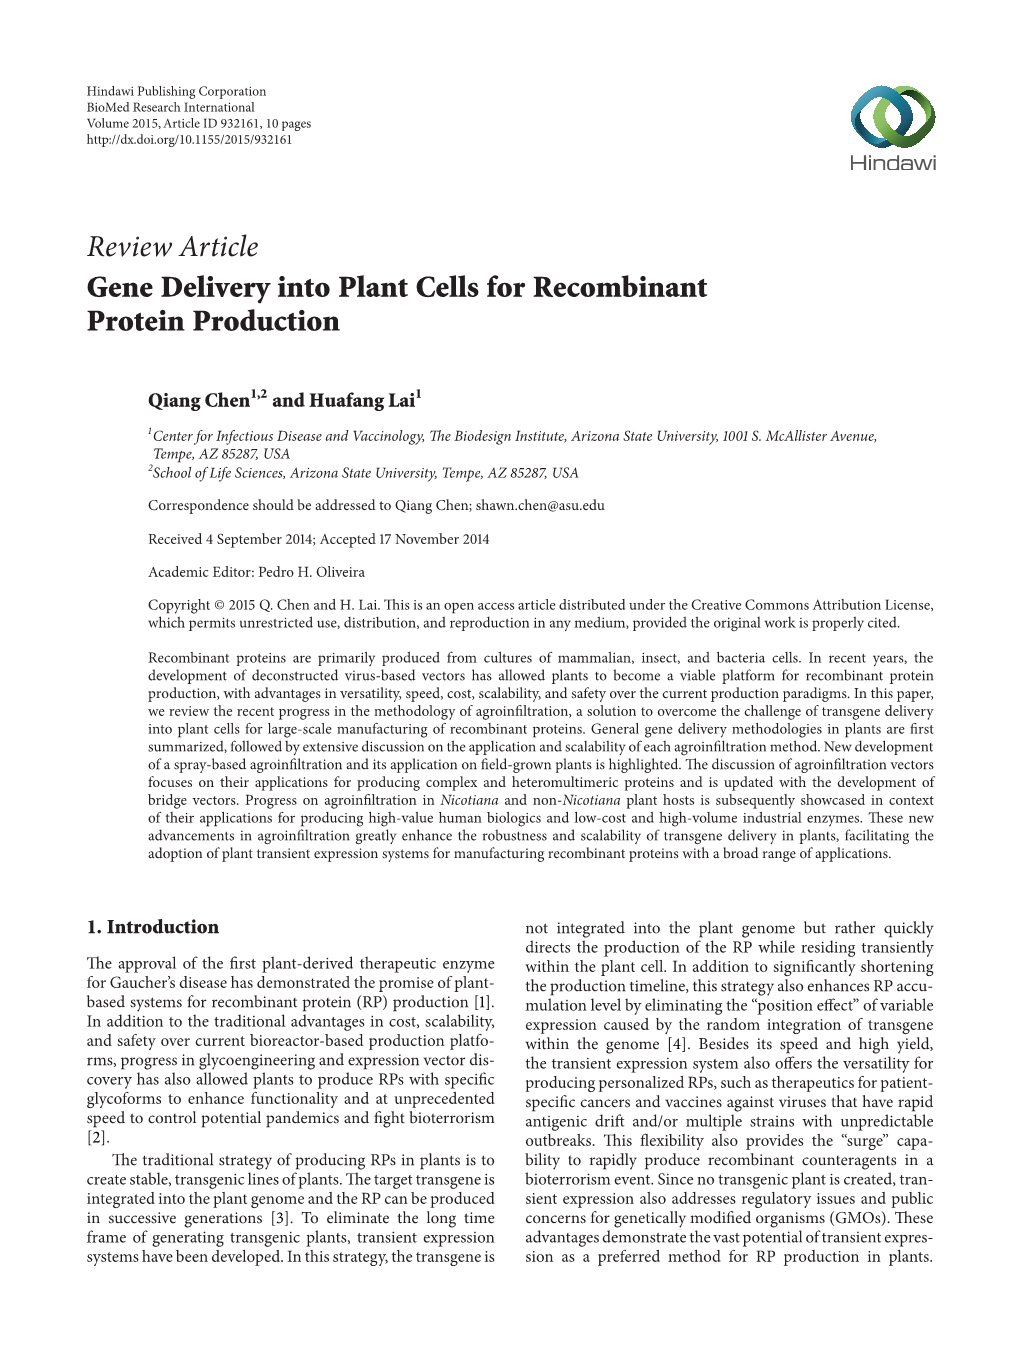 Gene Delivery Into Plant Cells for Recombinant Protein Production